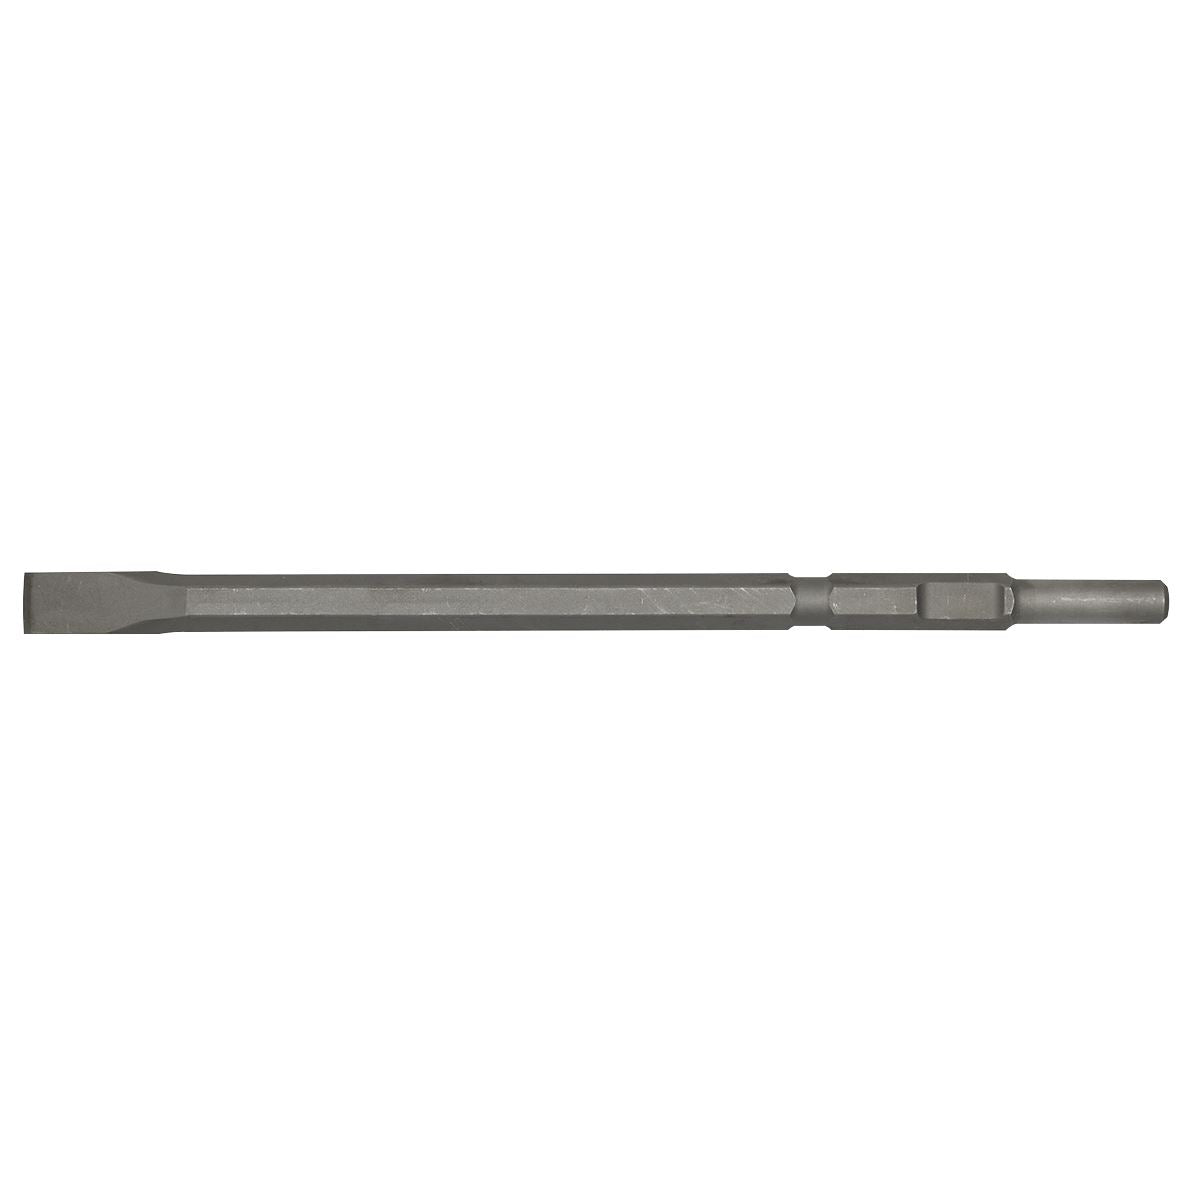 Worksafe by Sealey Chisel 35 x 450mm - Kango 900